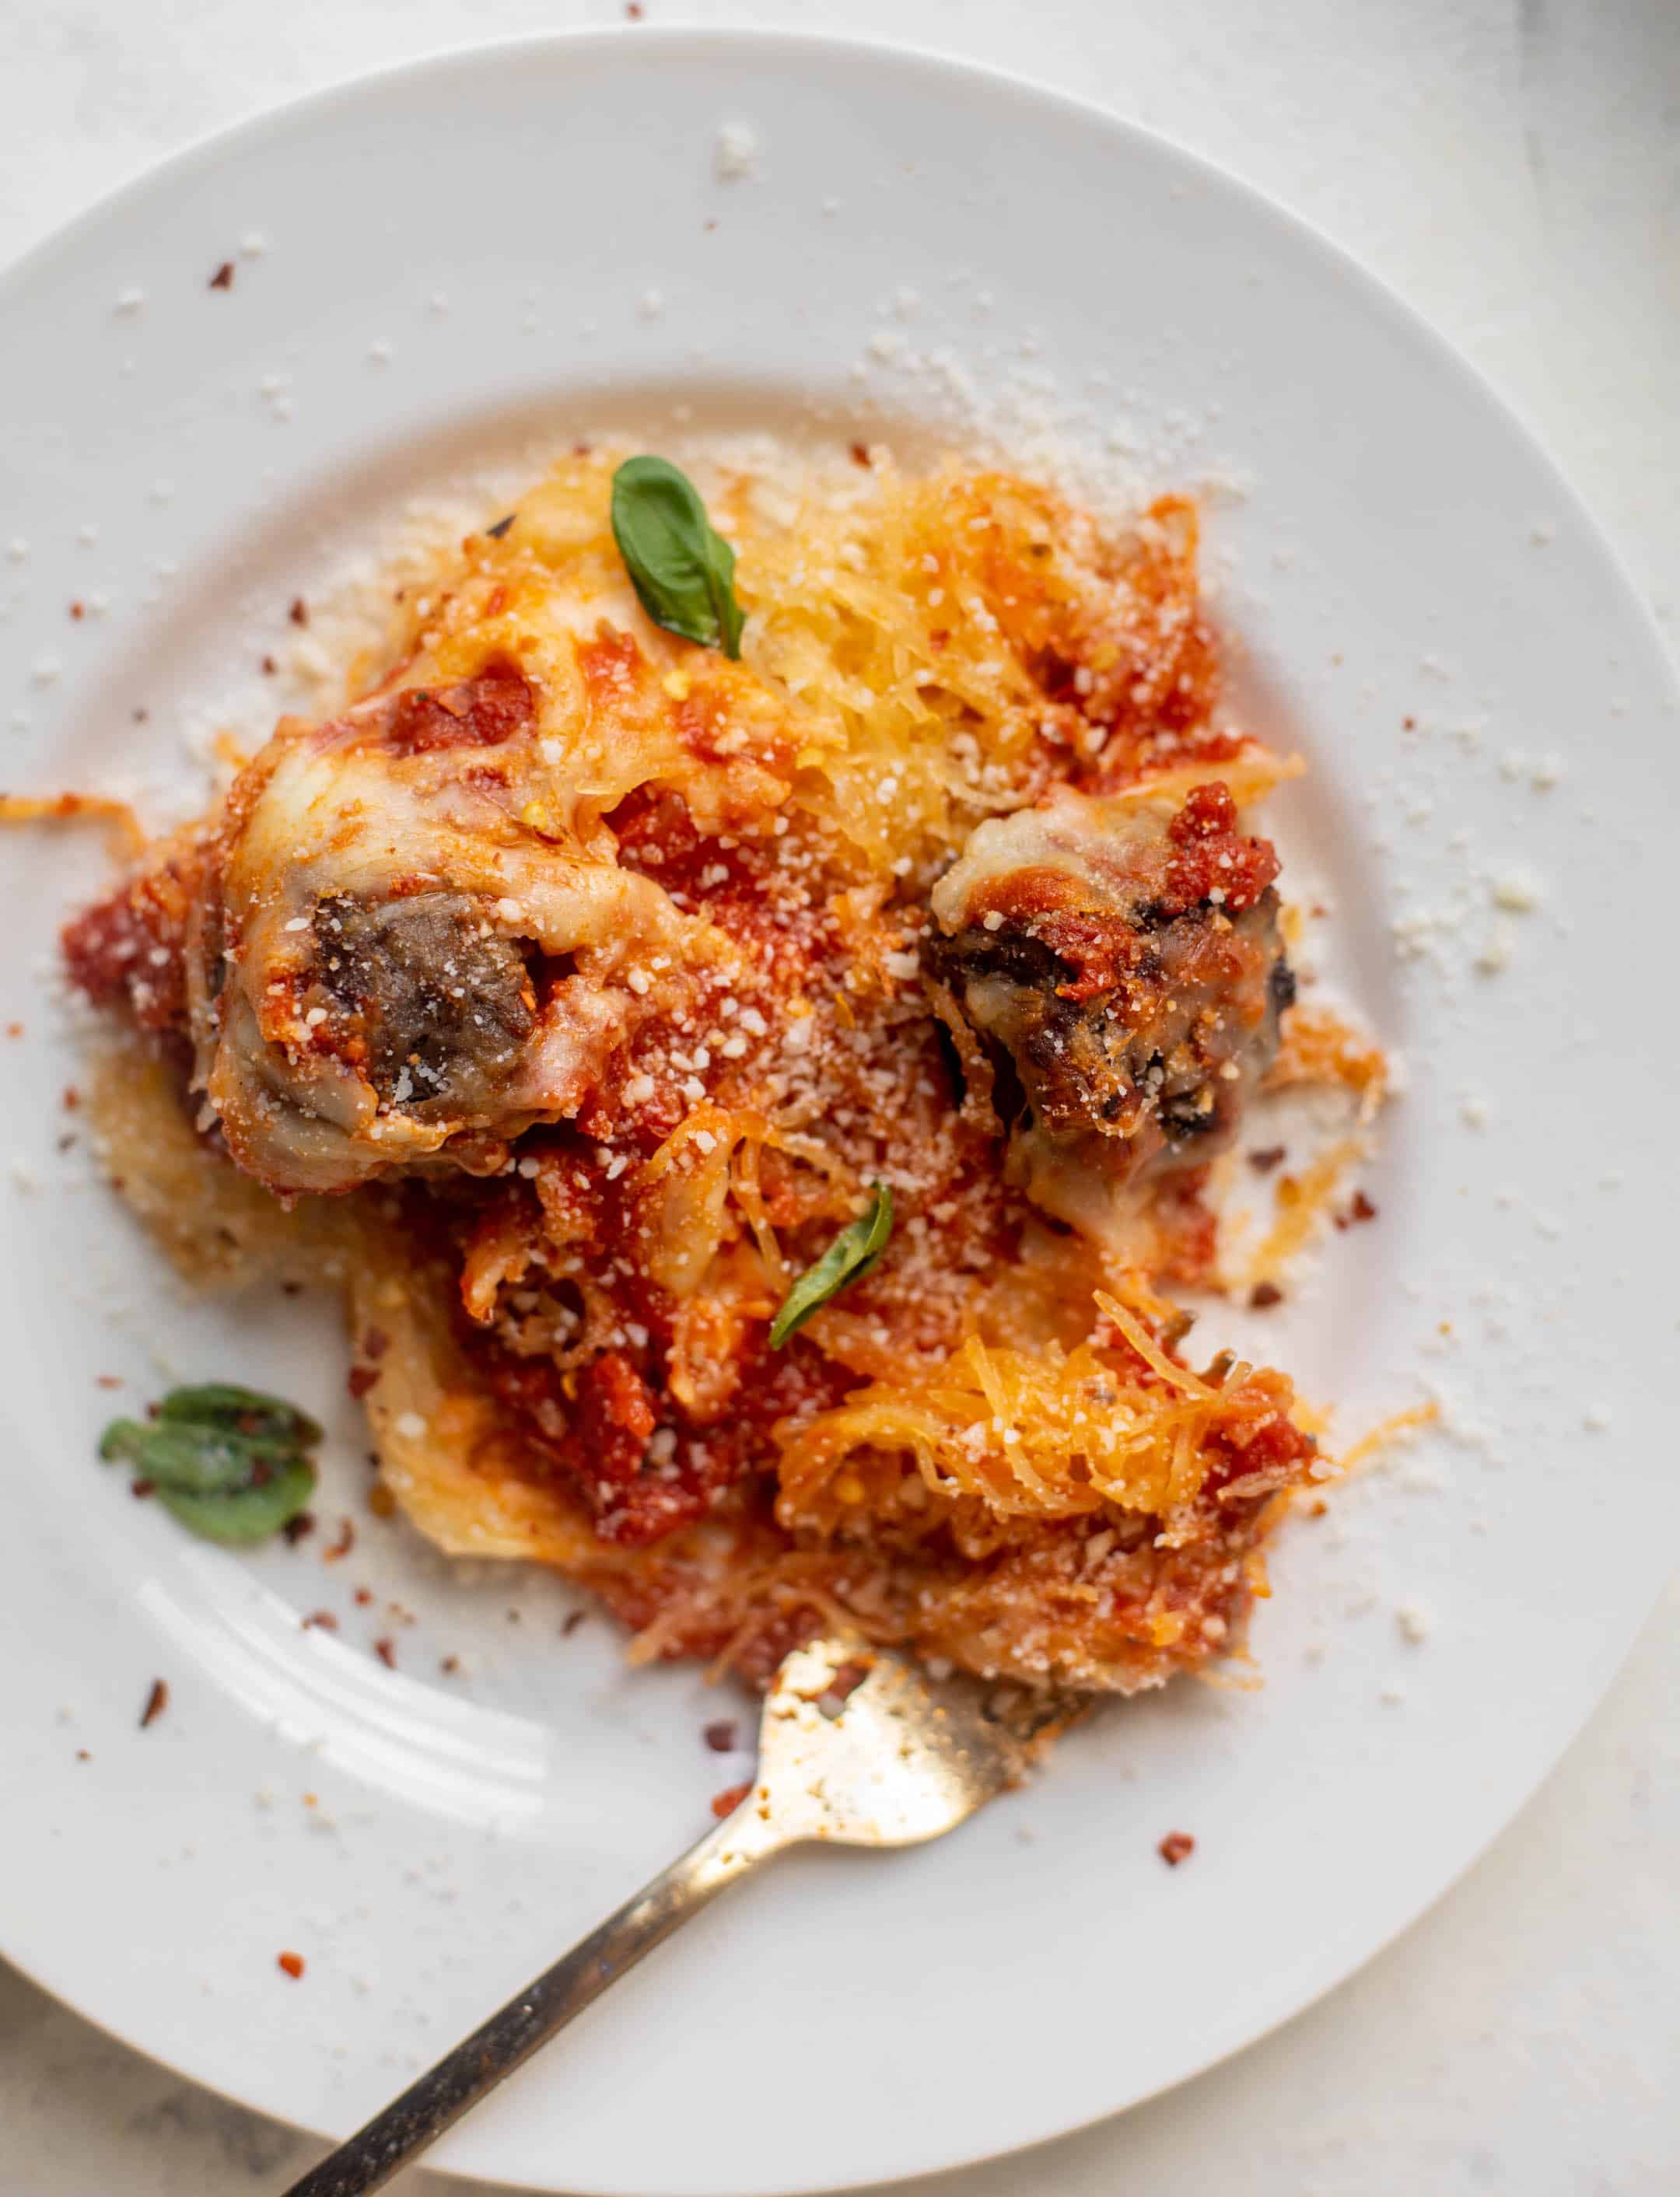 baked spaghetti squash and meatballs